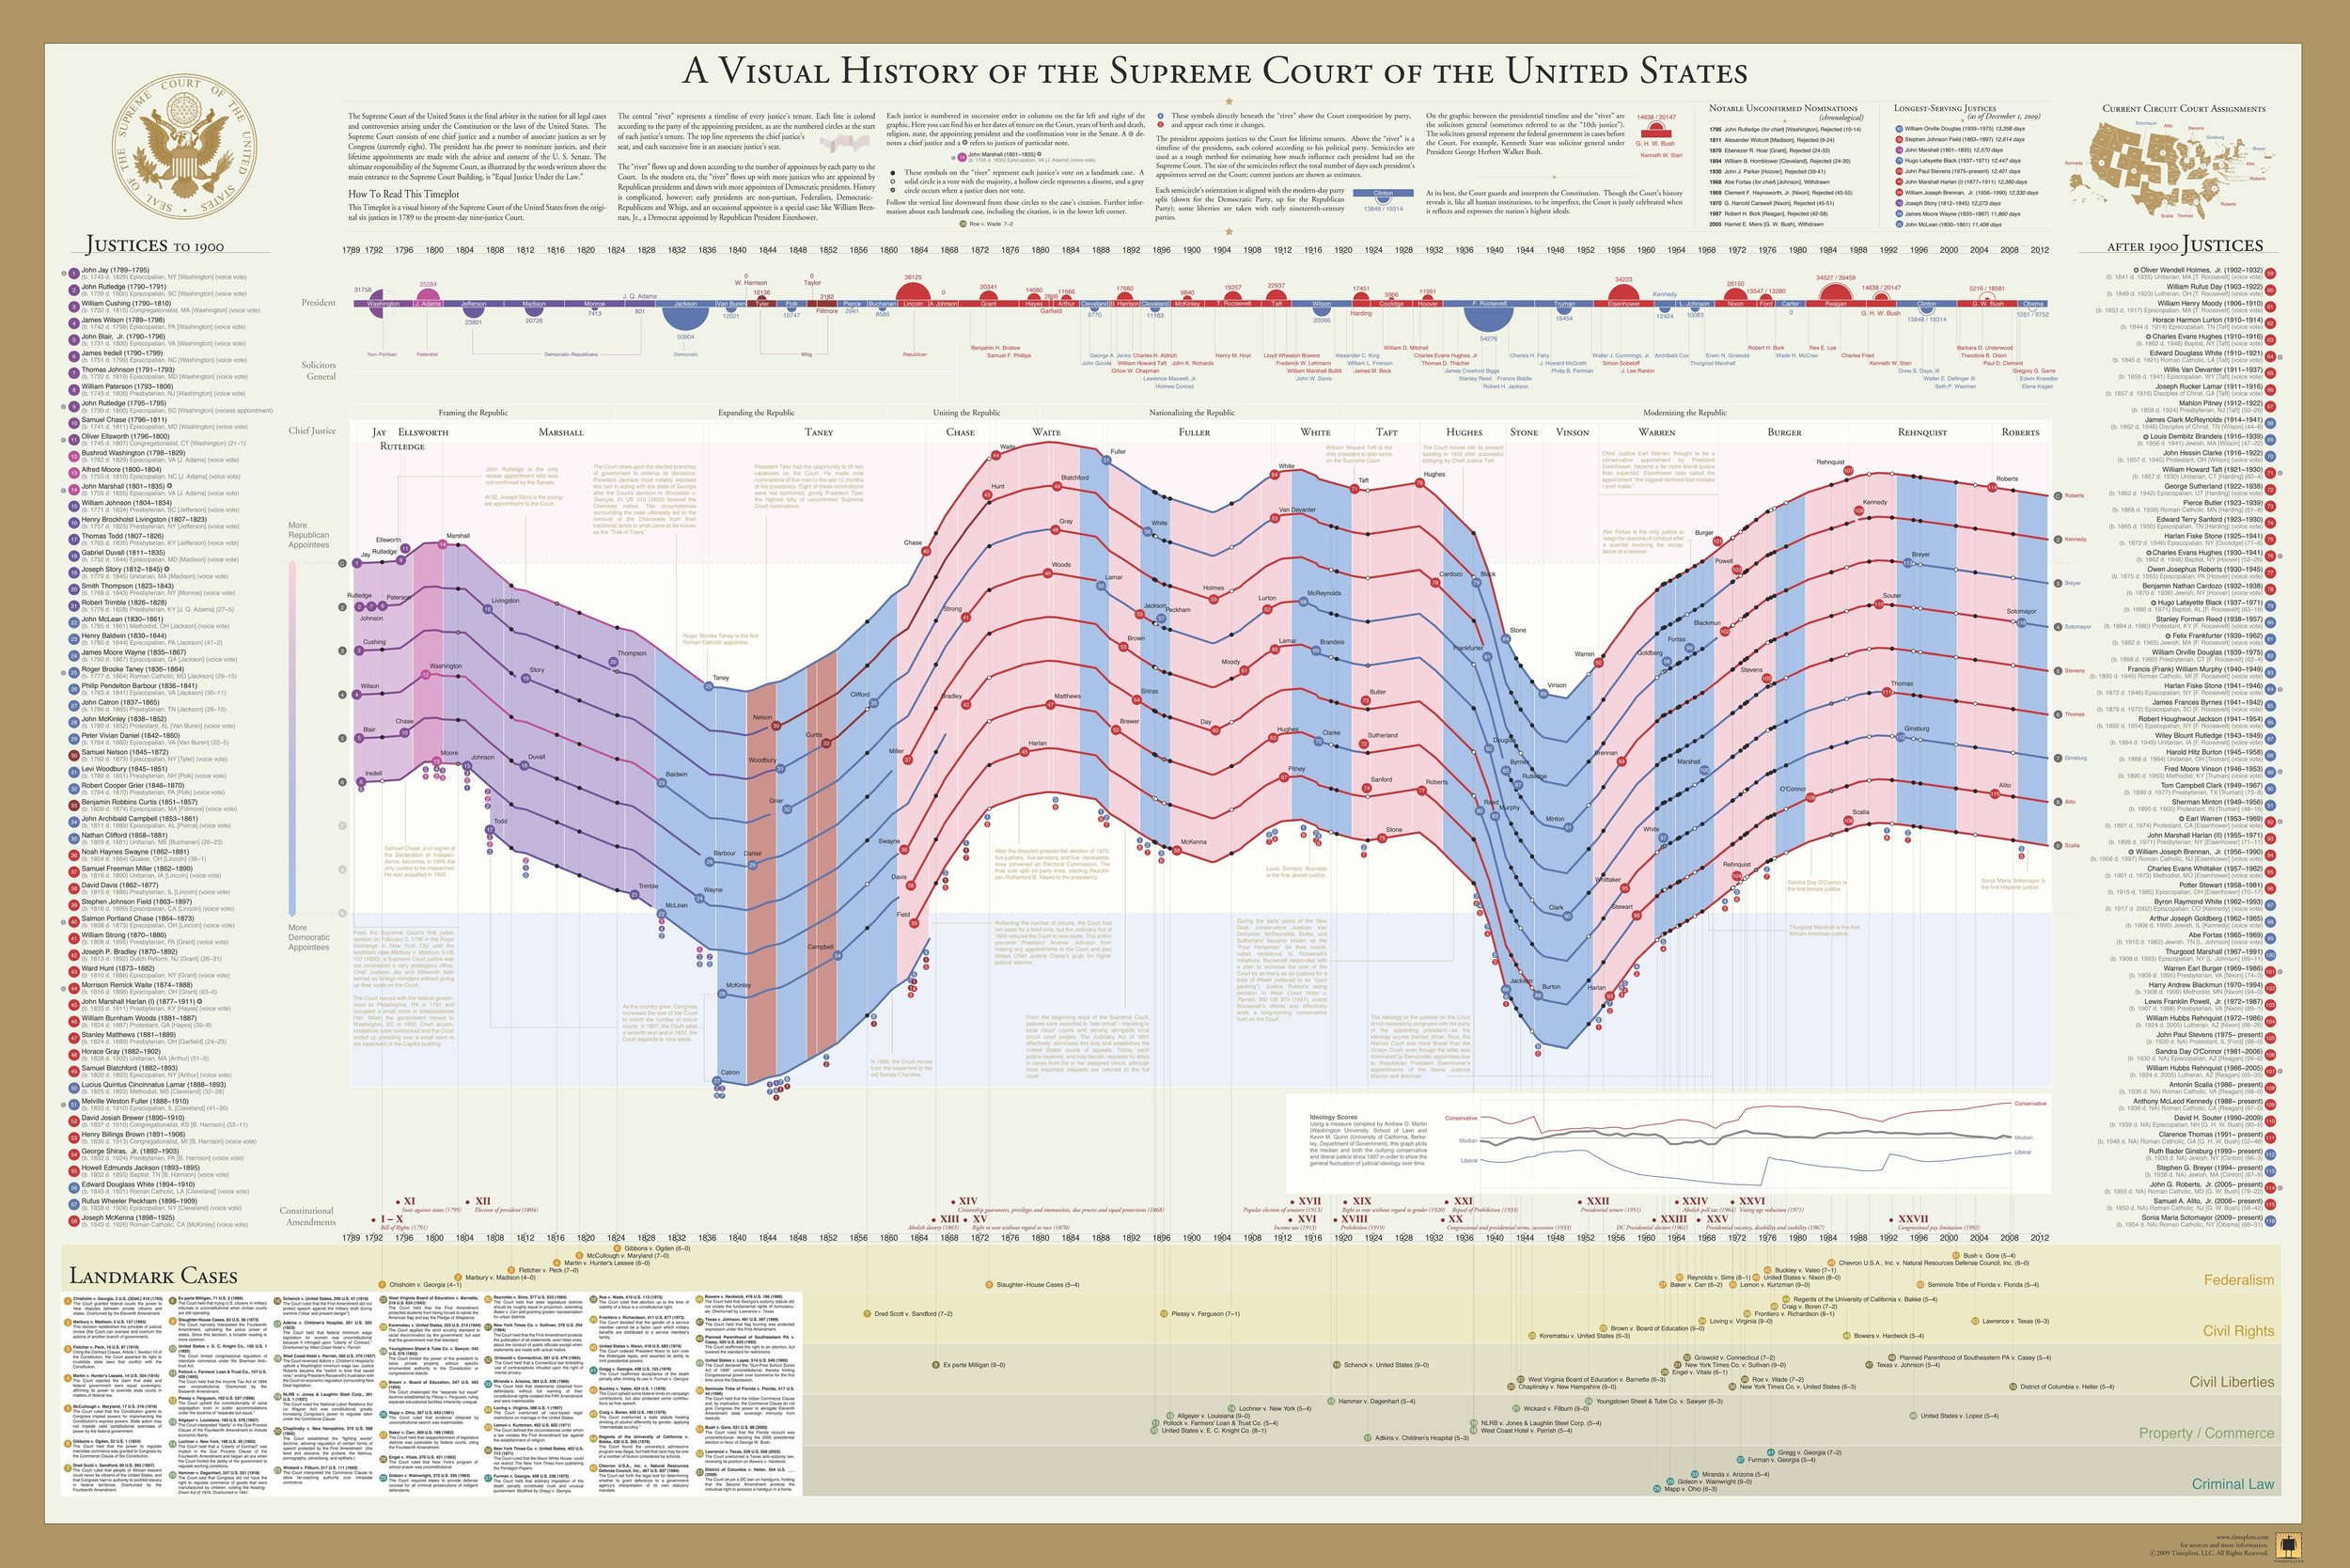 A Visual History of the U.S. Supreme Court